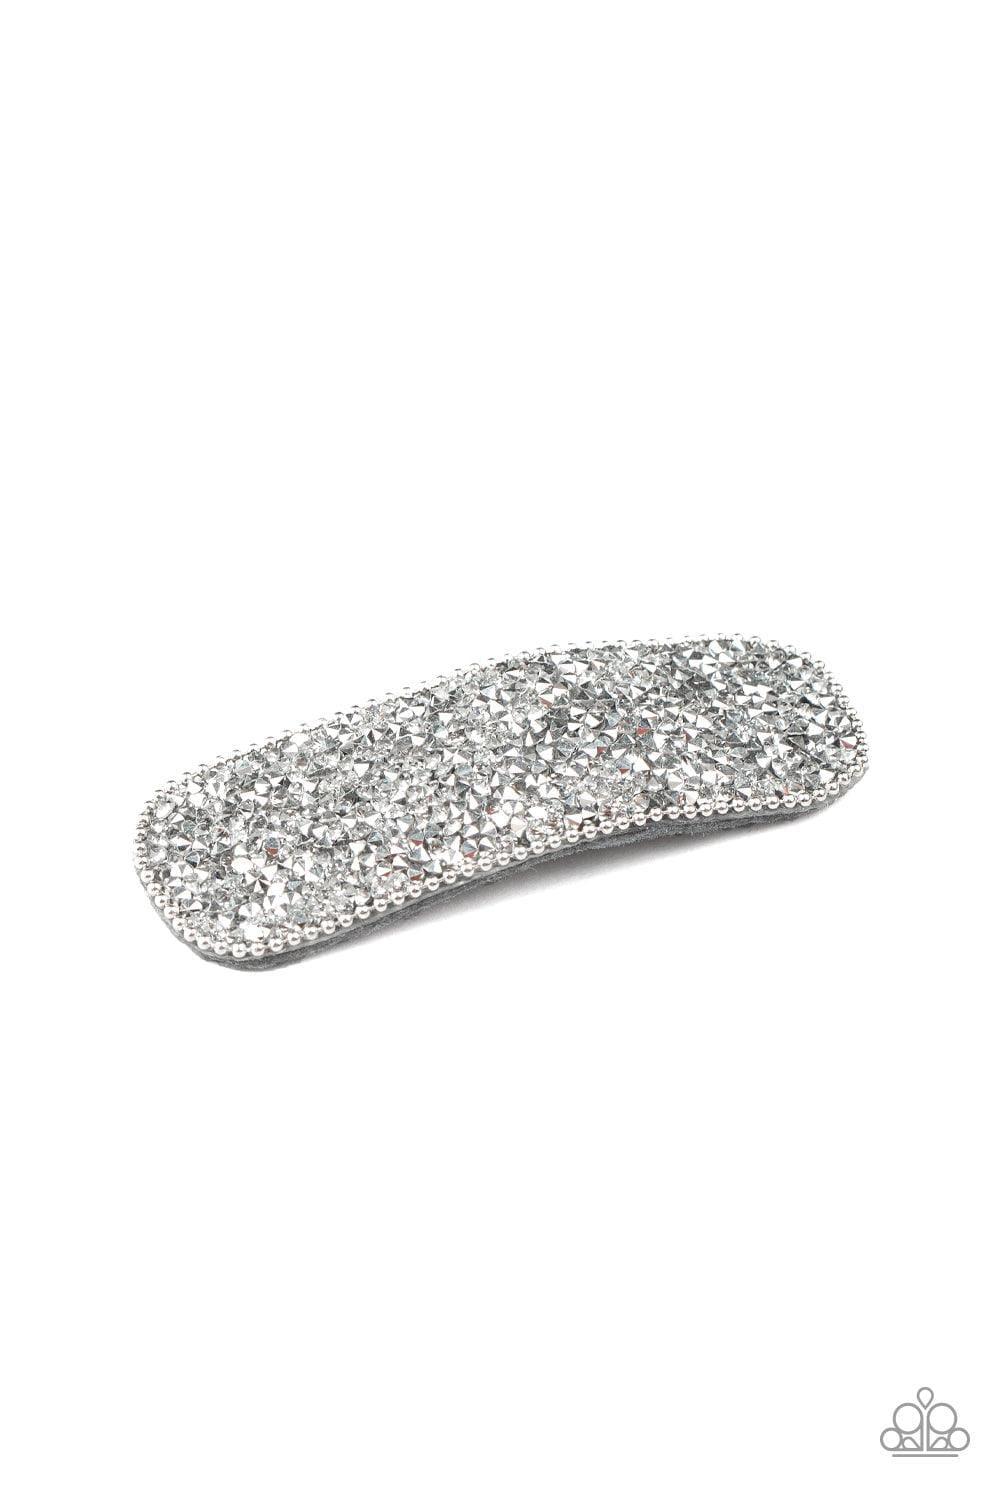 Paparazzi Accessories - From Hair On Out - Silver Hair Clip - Bling by JessieK